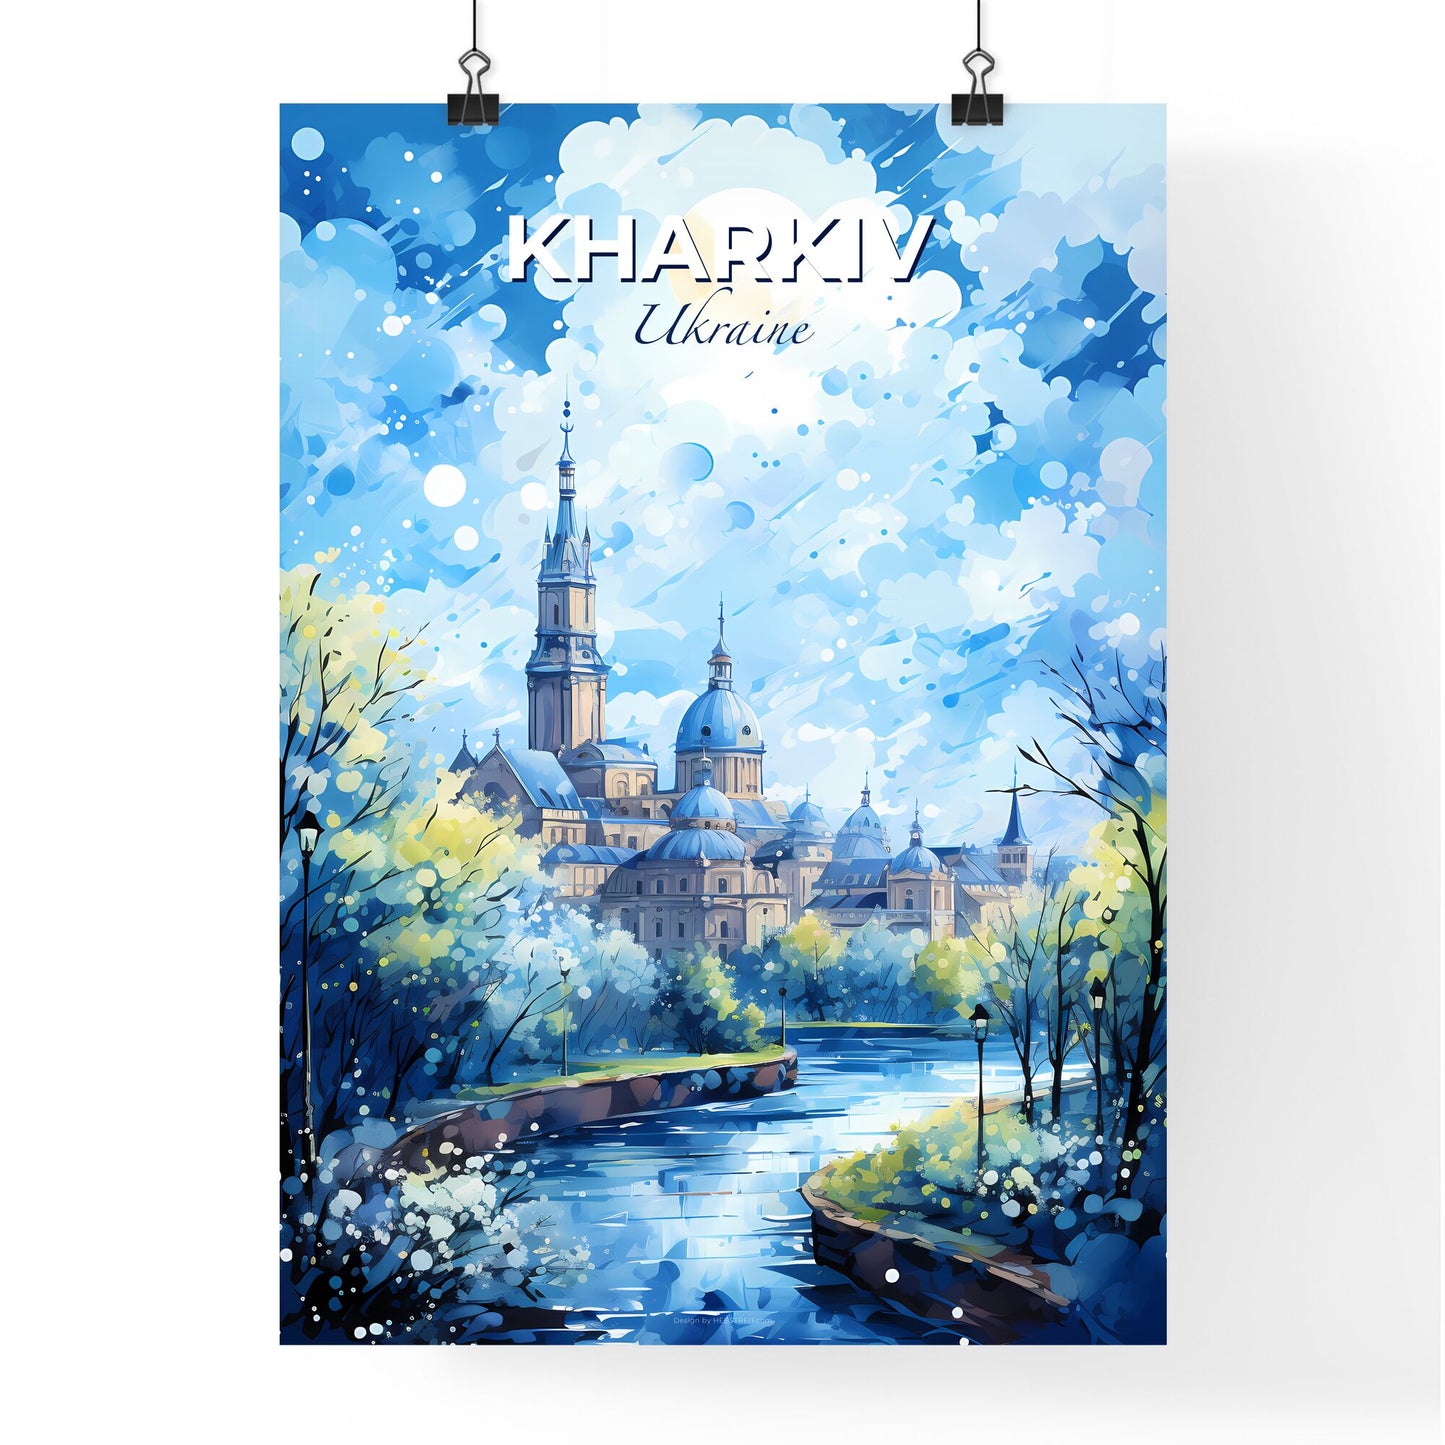 Kharkiv Ukraine Skyline - A Watercolor Painting Of A Castle And Trees - Customizable Travel Gift Default Title